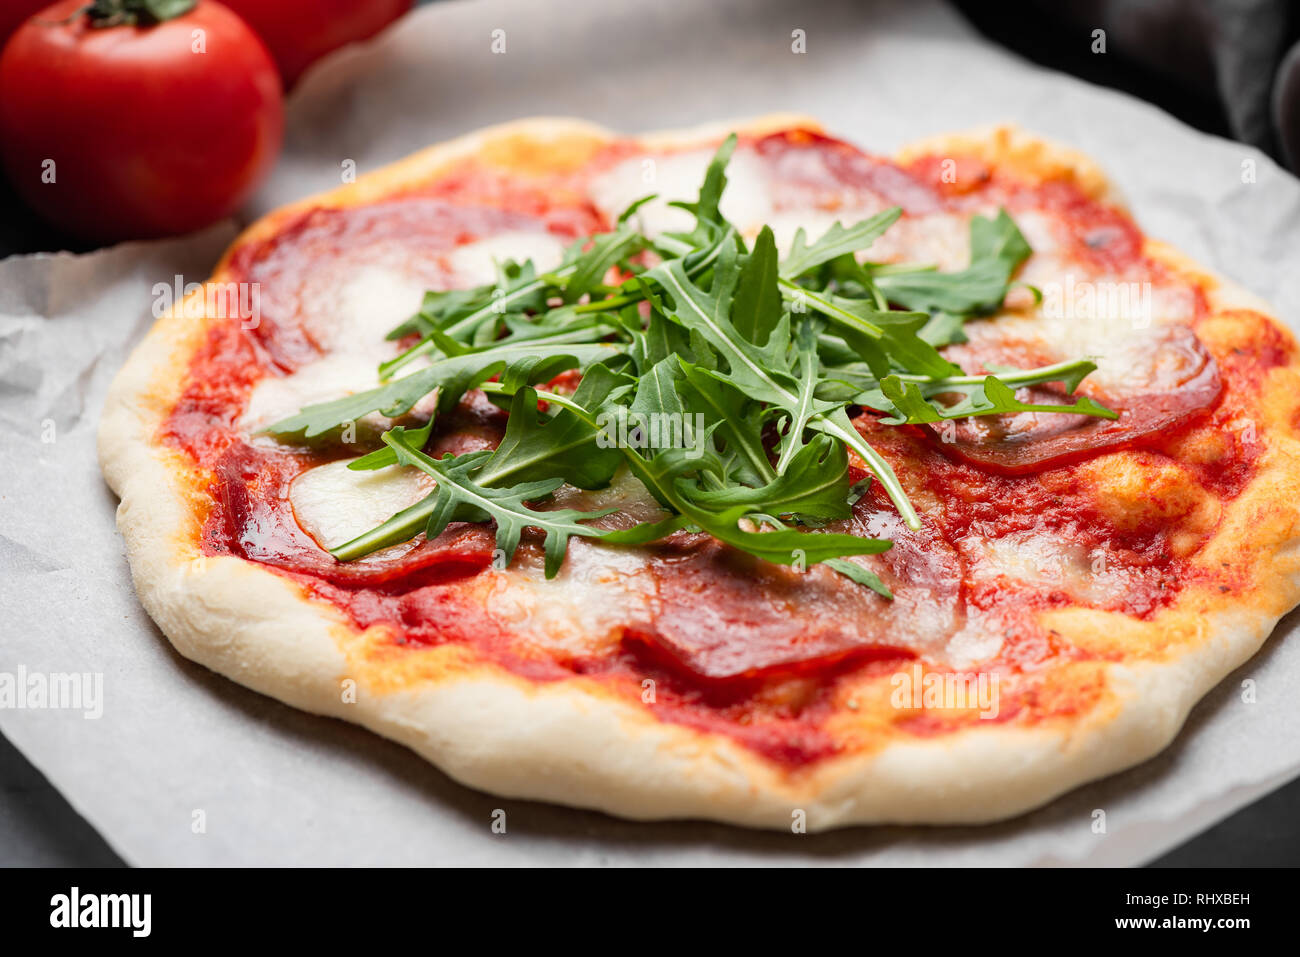 Italian Pizza With Salami And Fresh Arugula. Selective focus. Tasty homemade pizza. Takeout pizza Stock Photo